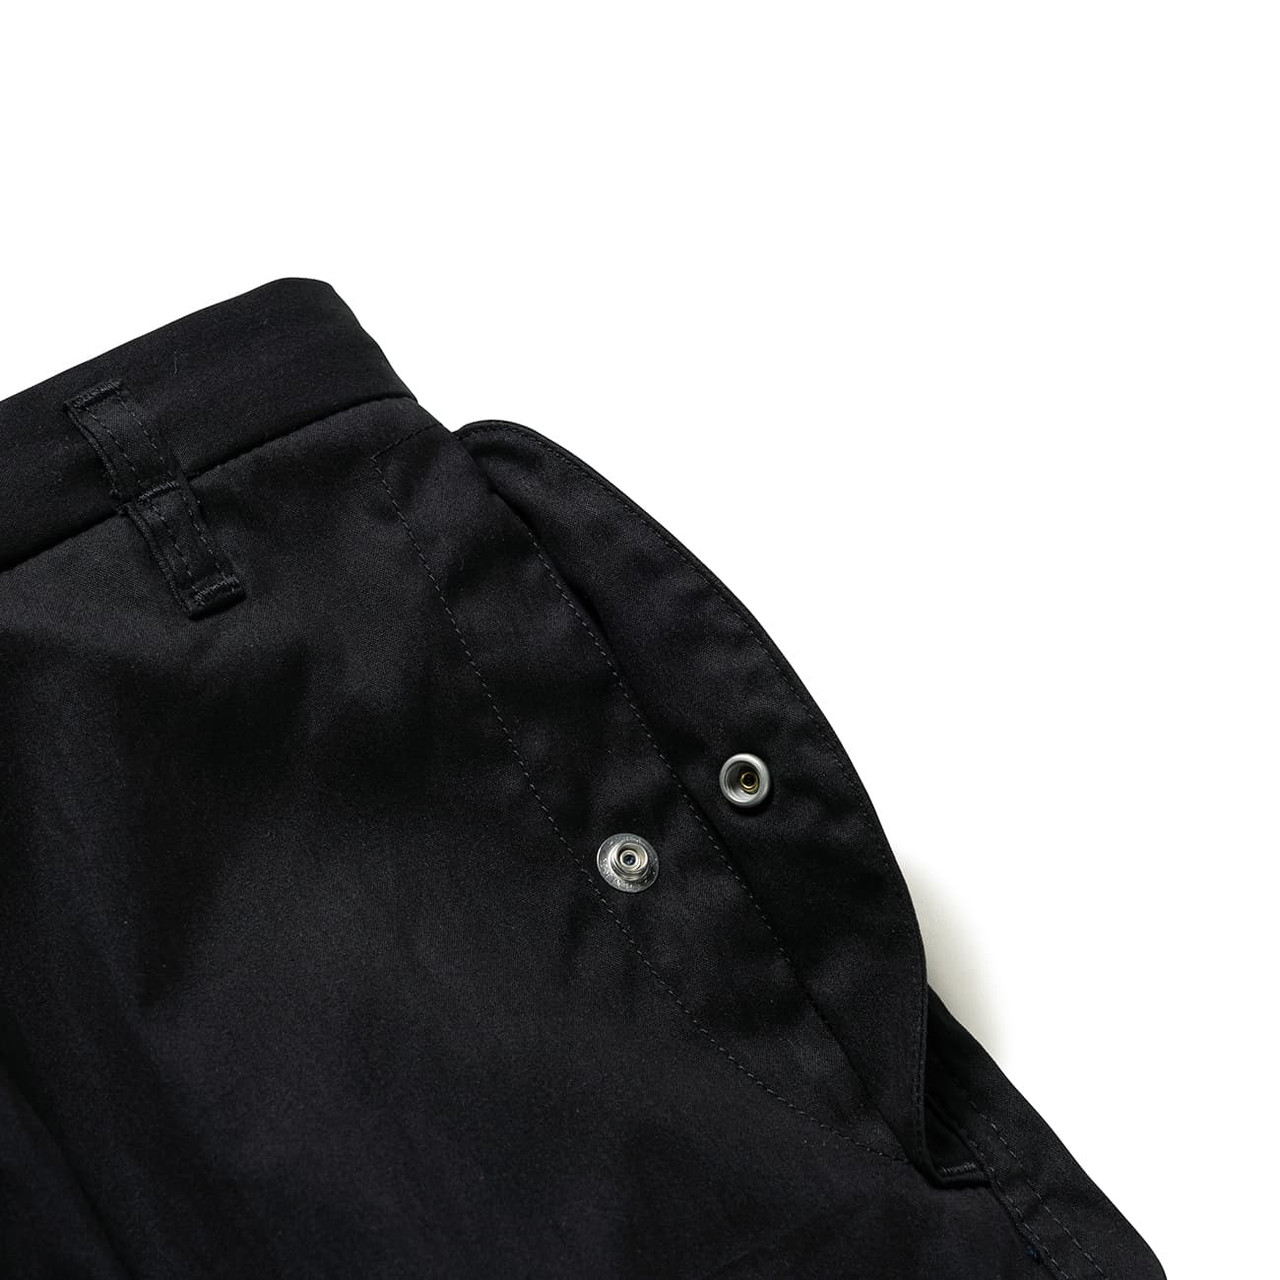 MILT0001 / TROUSERS / NYCO. OXFORD 232WVDT-PTM07